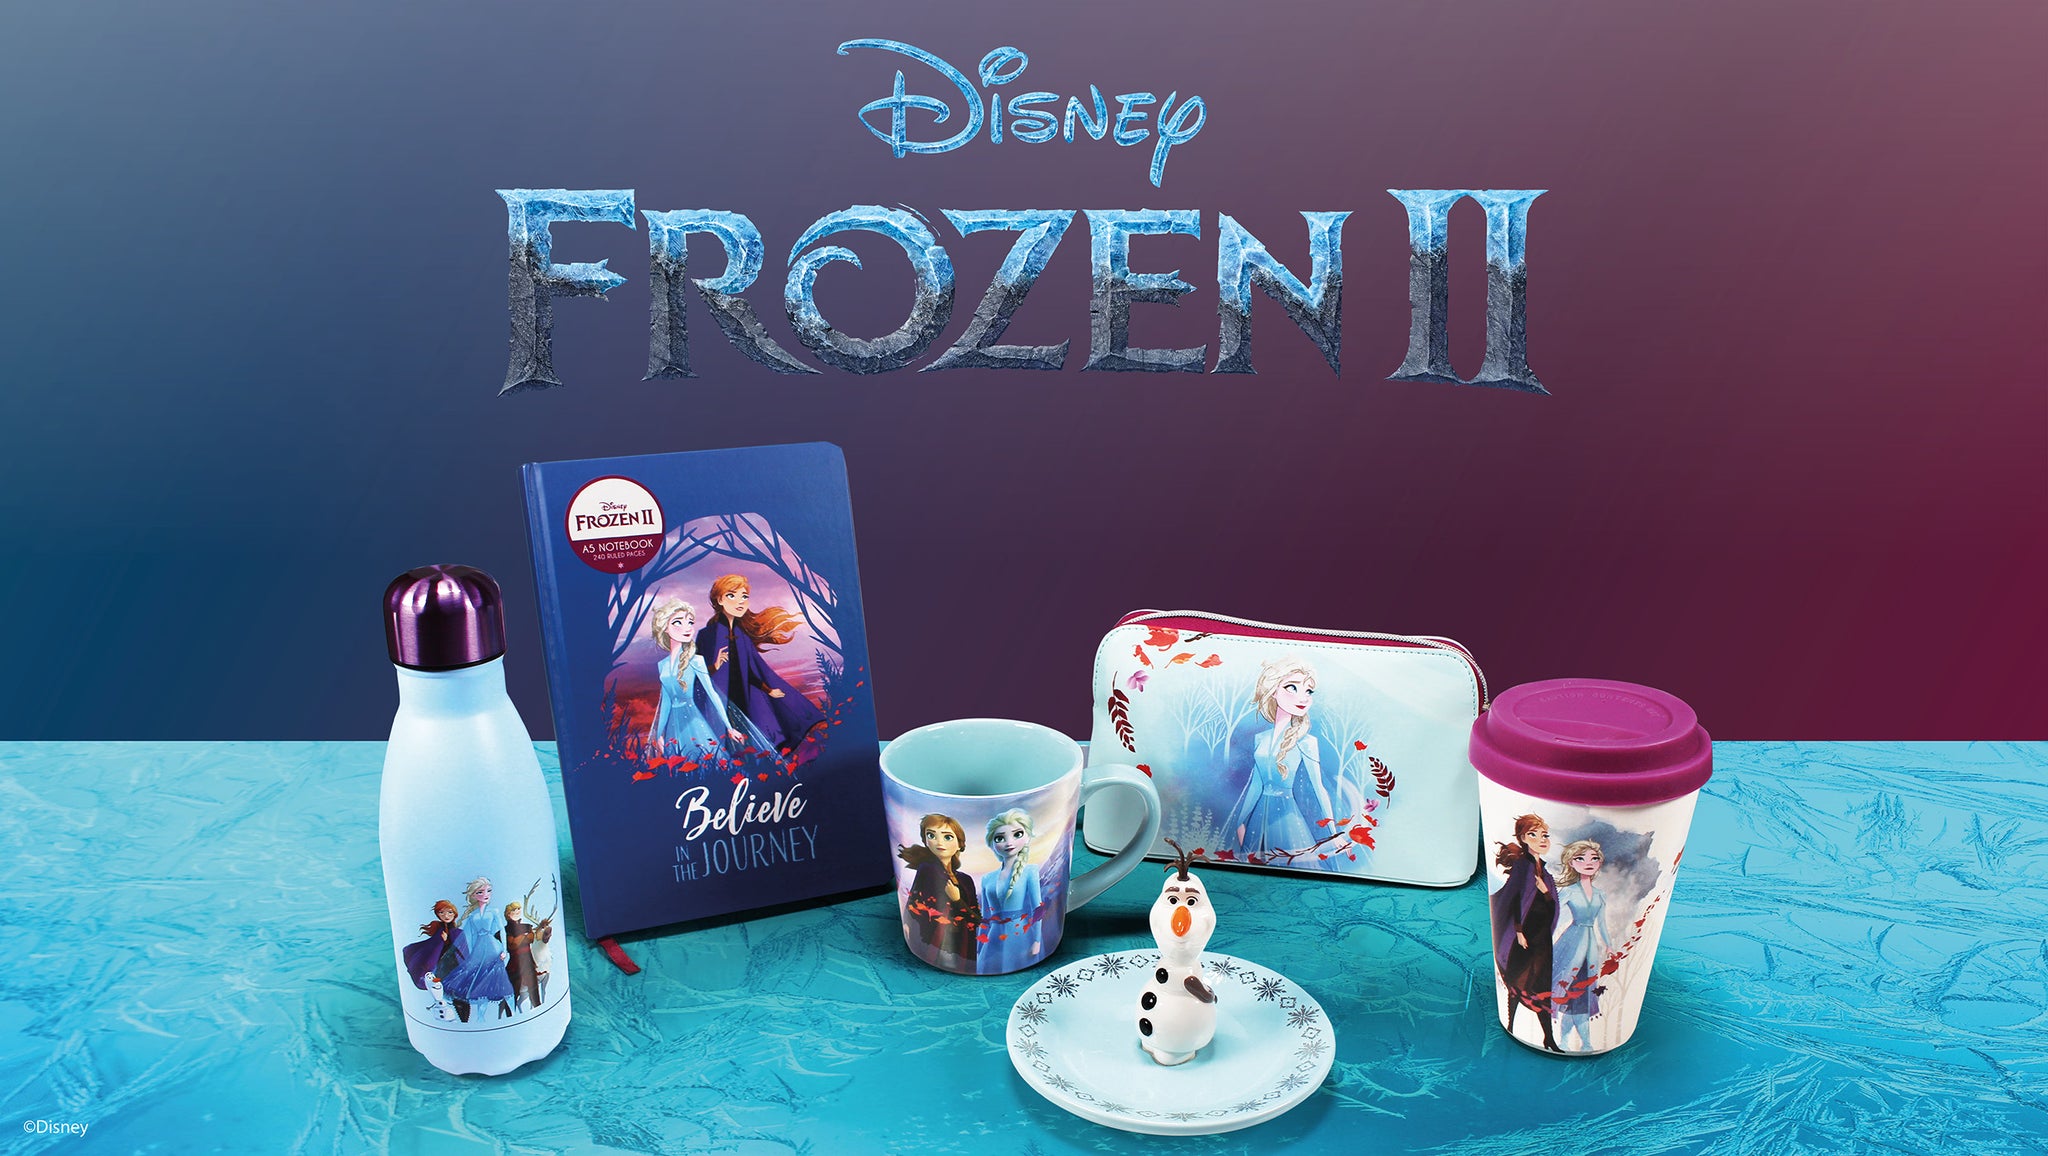 Half Moon Bay's Frozen 2 Collection Has Arrived!